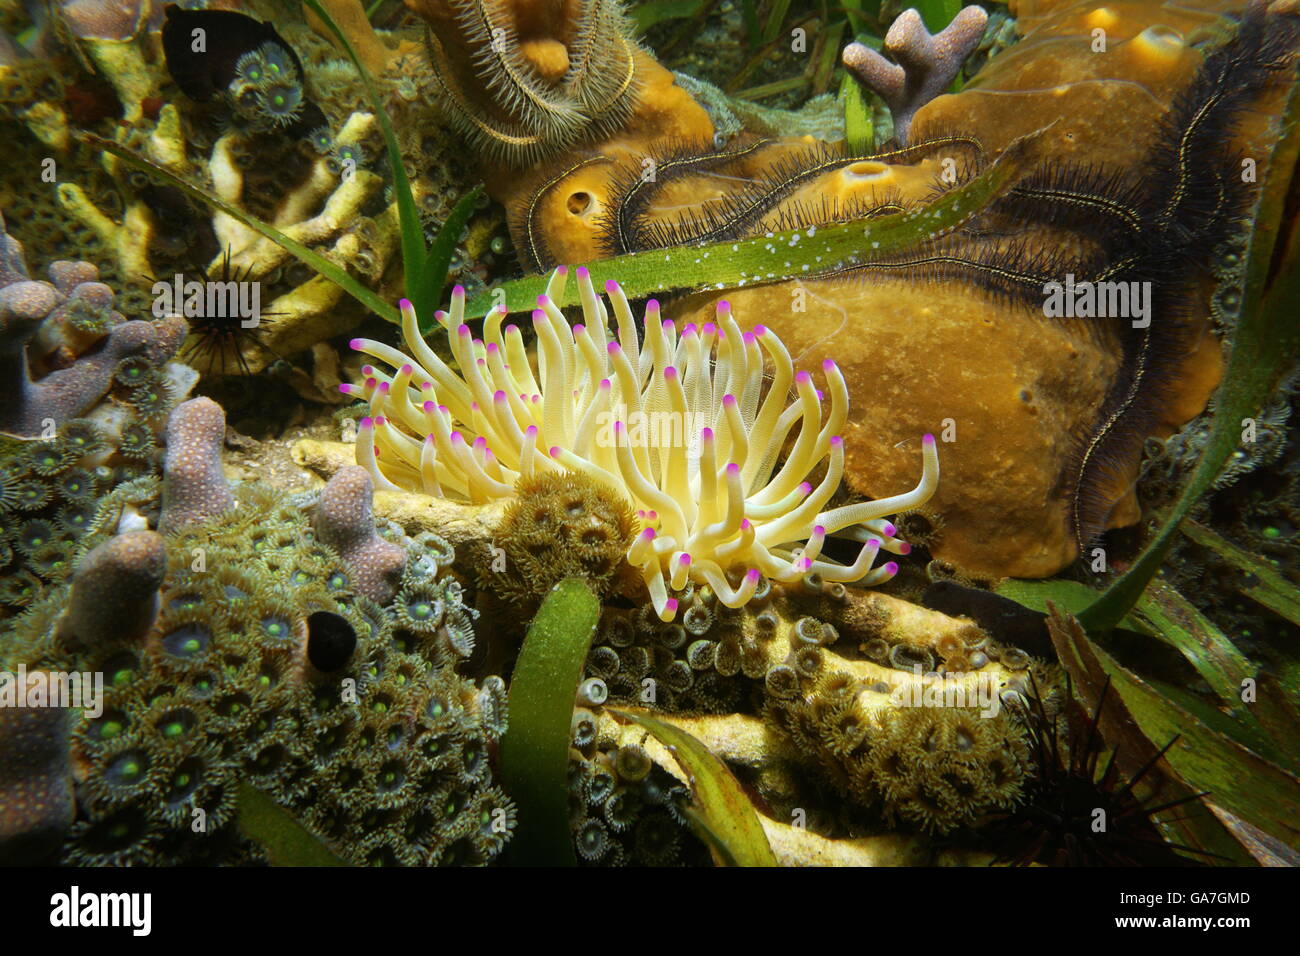 A giant Caribbean sea anemone, Condylactis gigantea, with underwater marine life on a shallow inshore reef, Central America Stock Photo